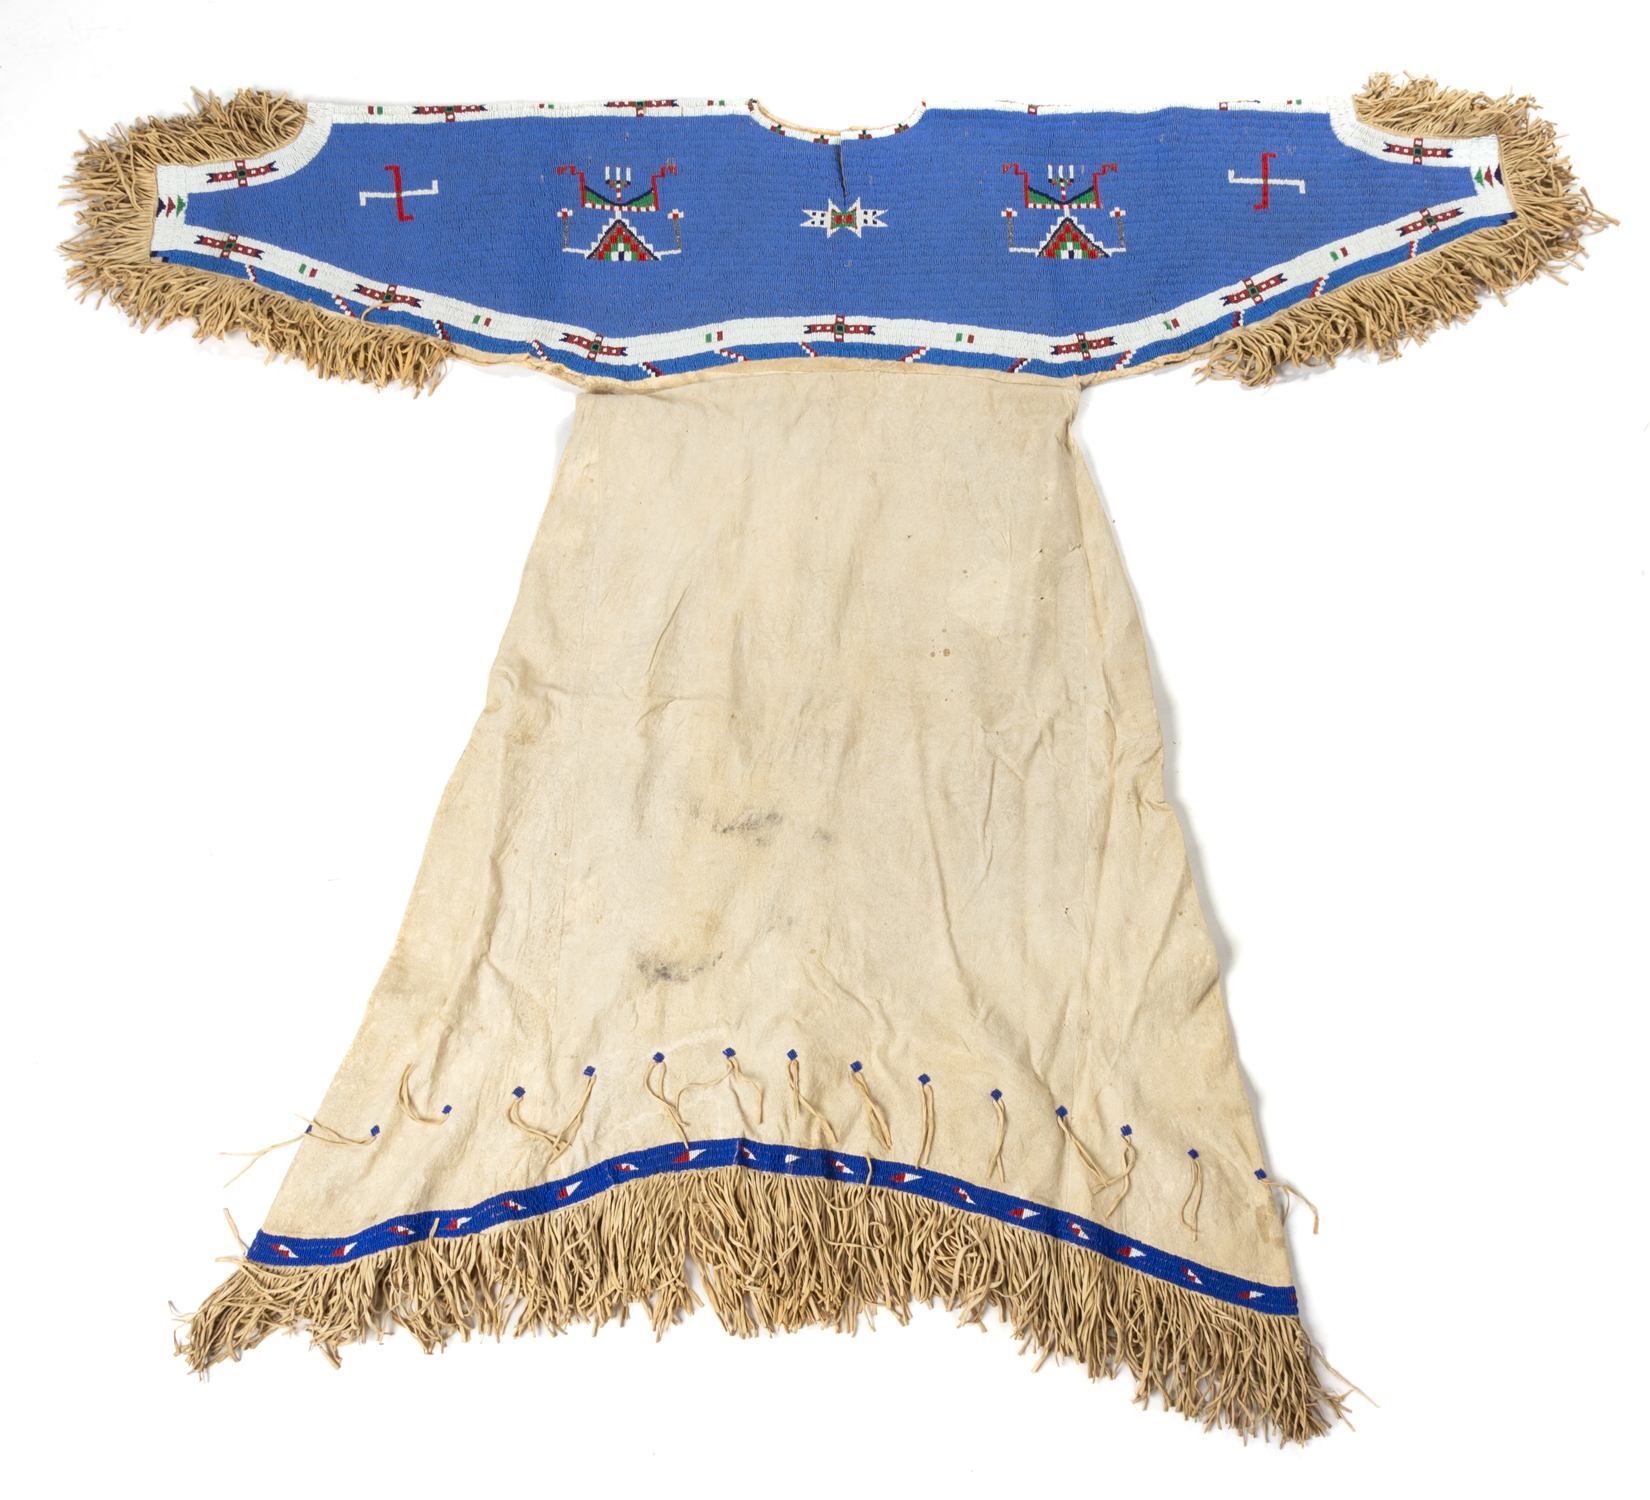 CHEYENNE WOMAN'S DRESS WITH WHIRLING